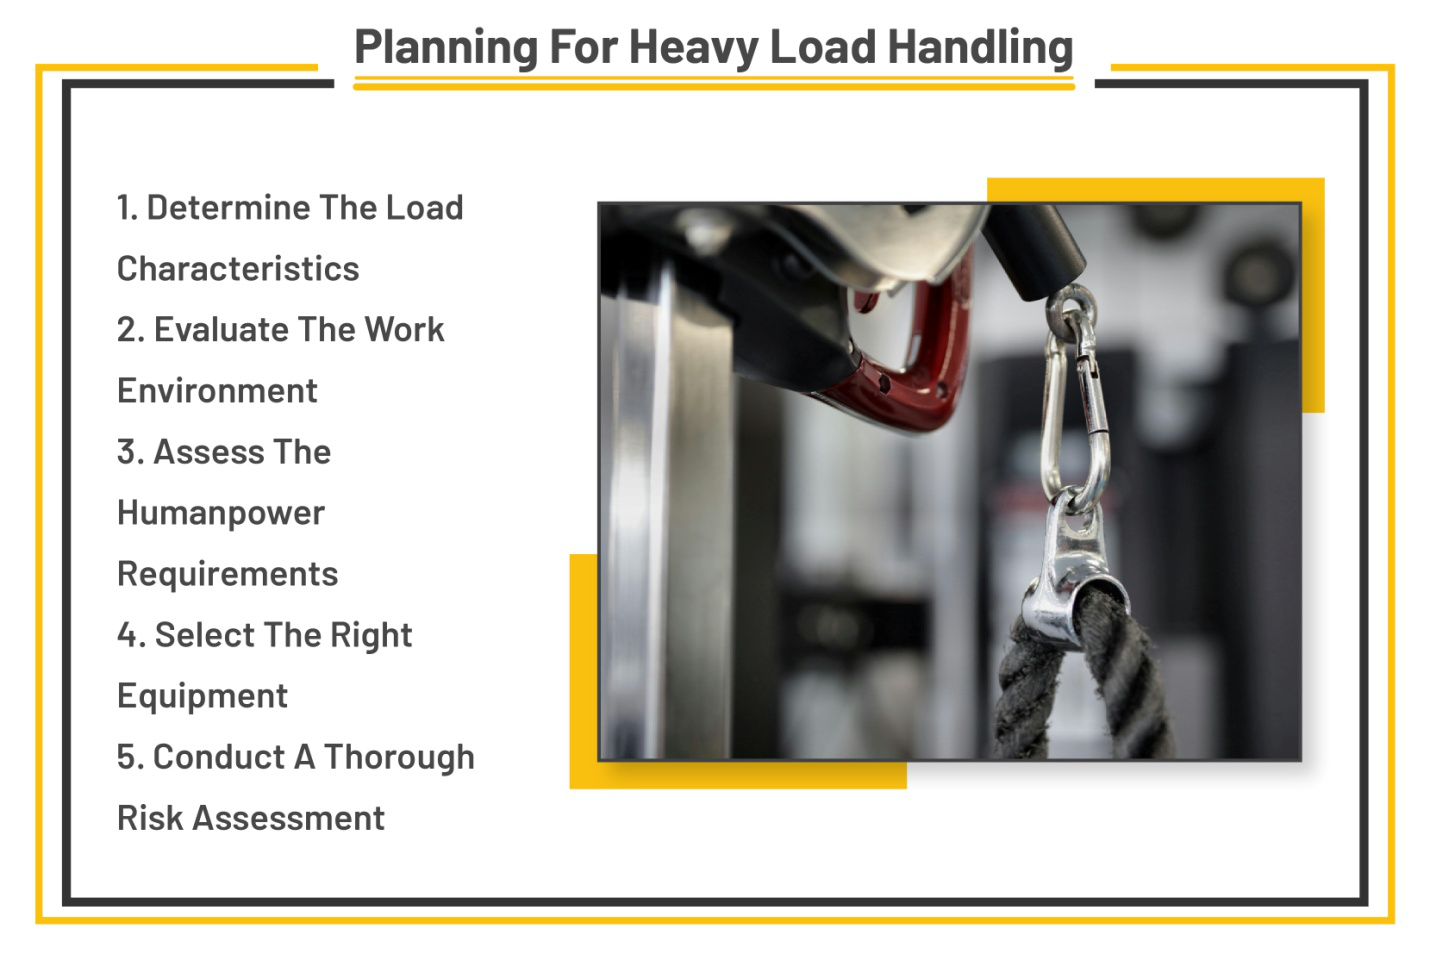 An infographic stating planning tips for heavy load handling